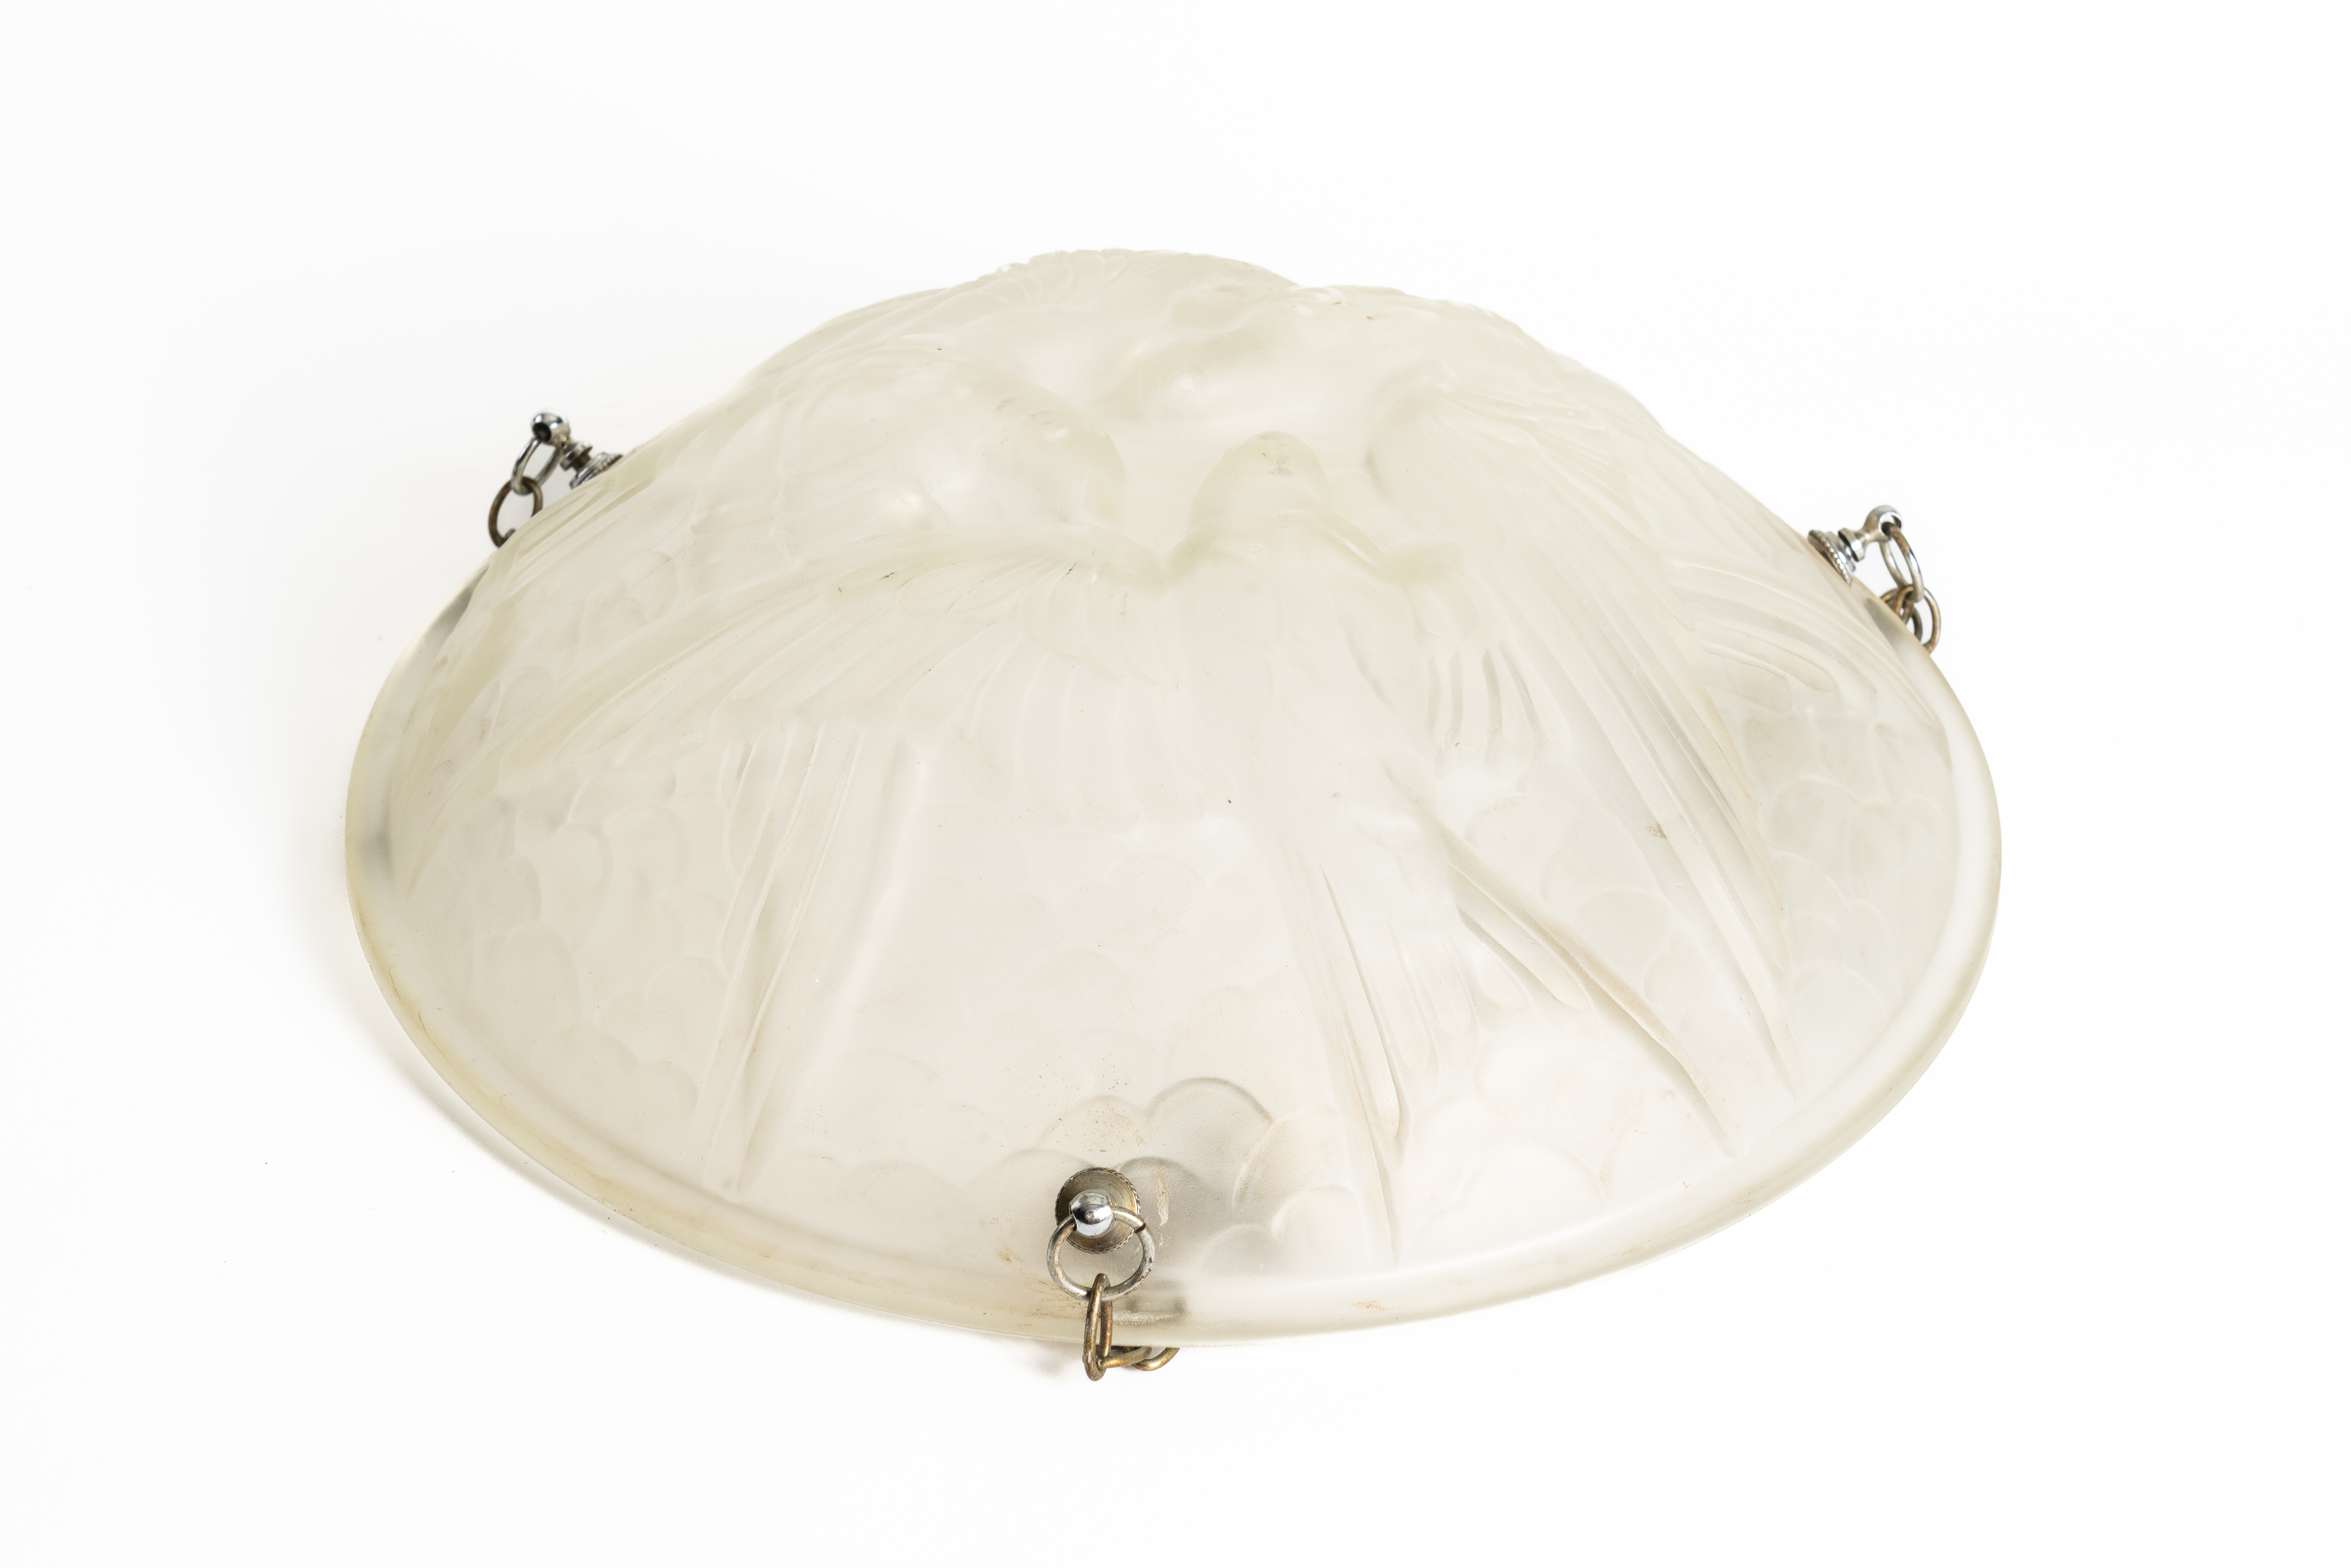 AN ART DECO FROSTED AND MOULDED GLASS HANGING DISH LIGHT